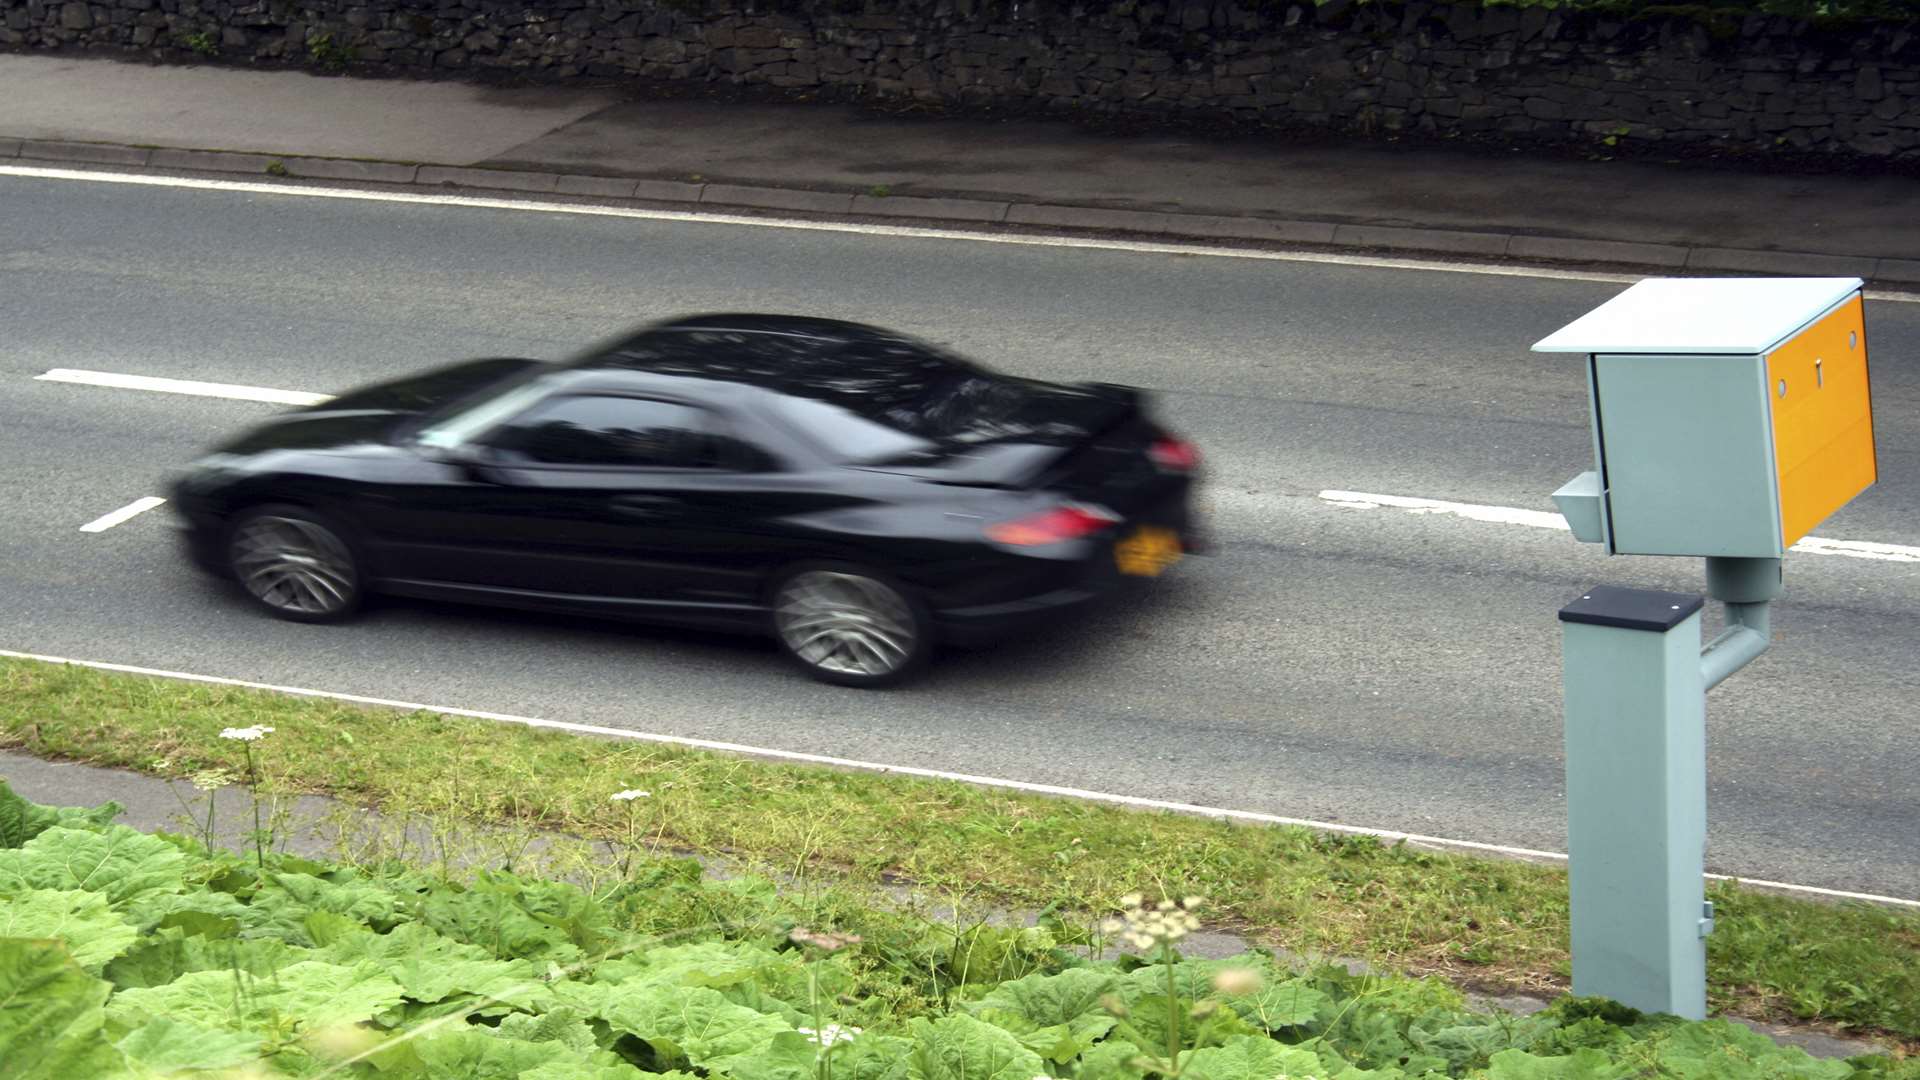 Stock picture of a sportscar going past a speed camera. Credit: iStock